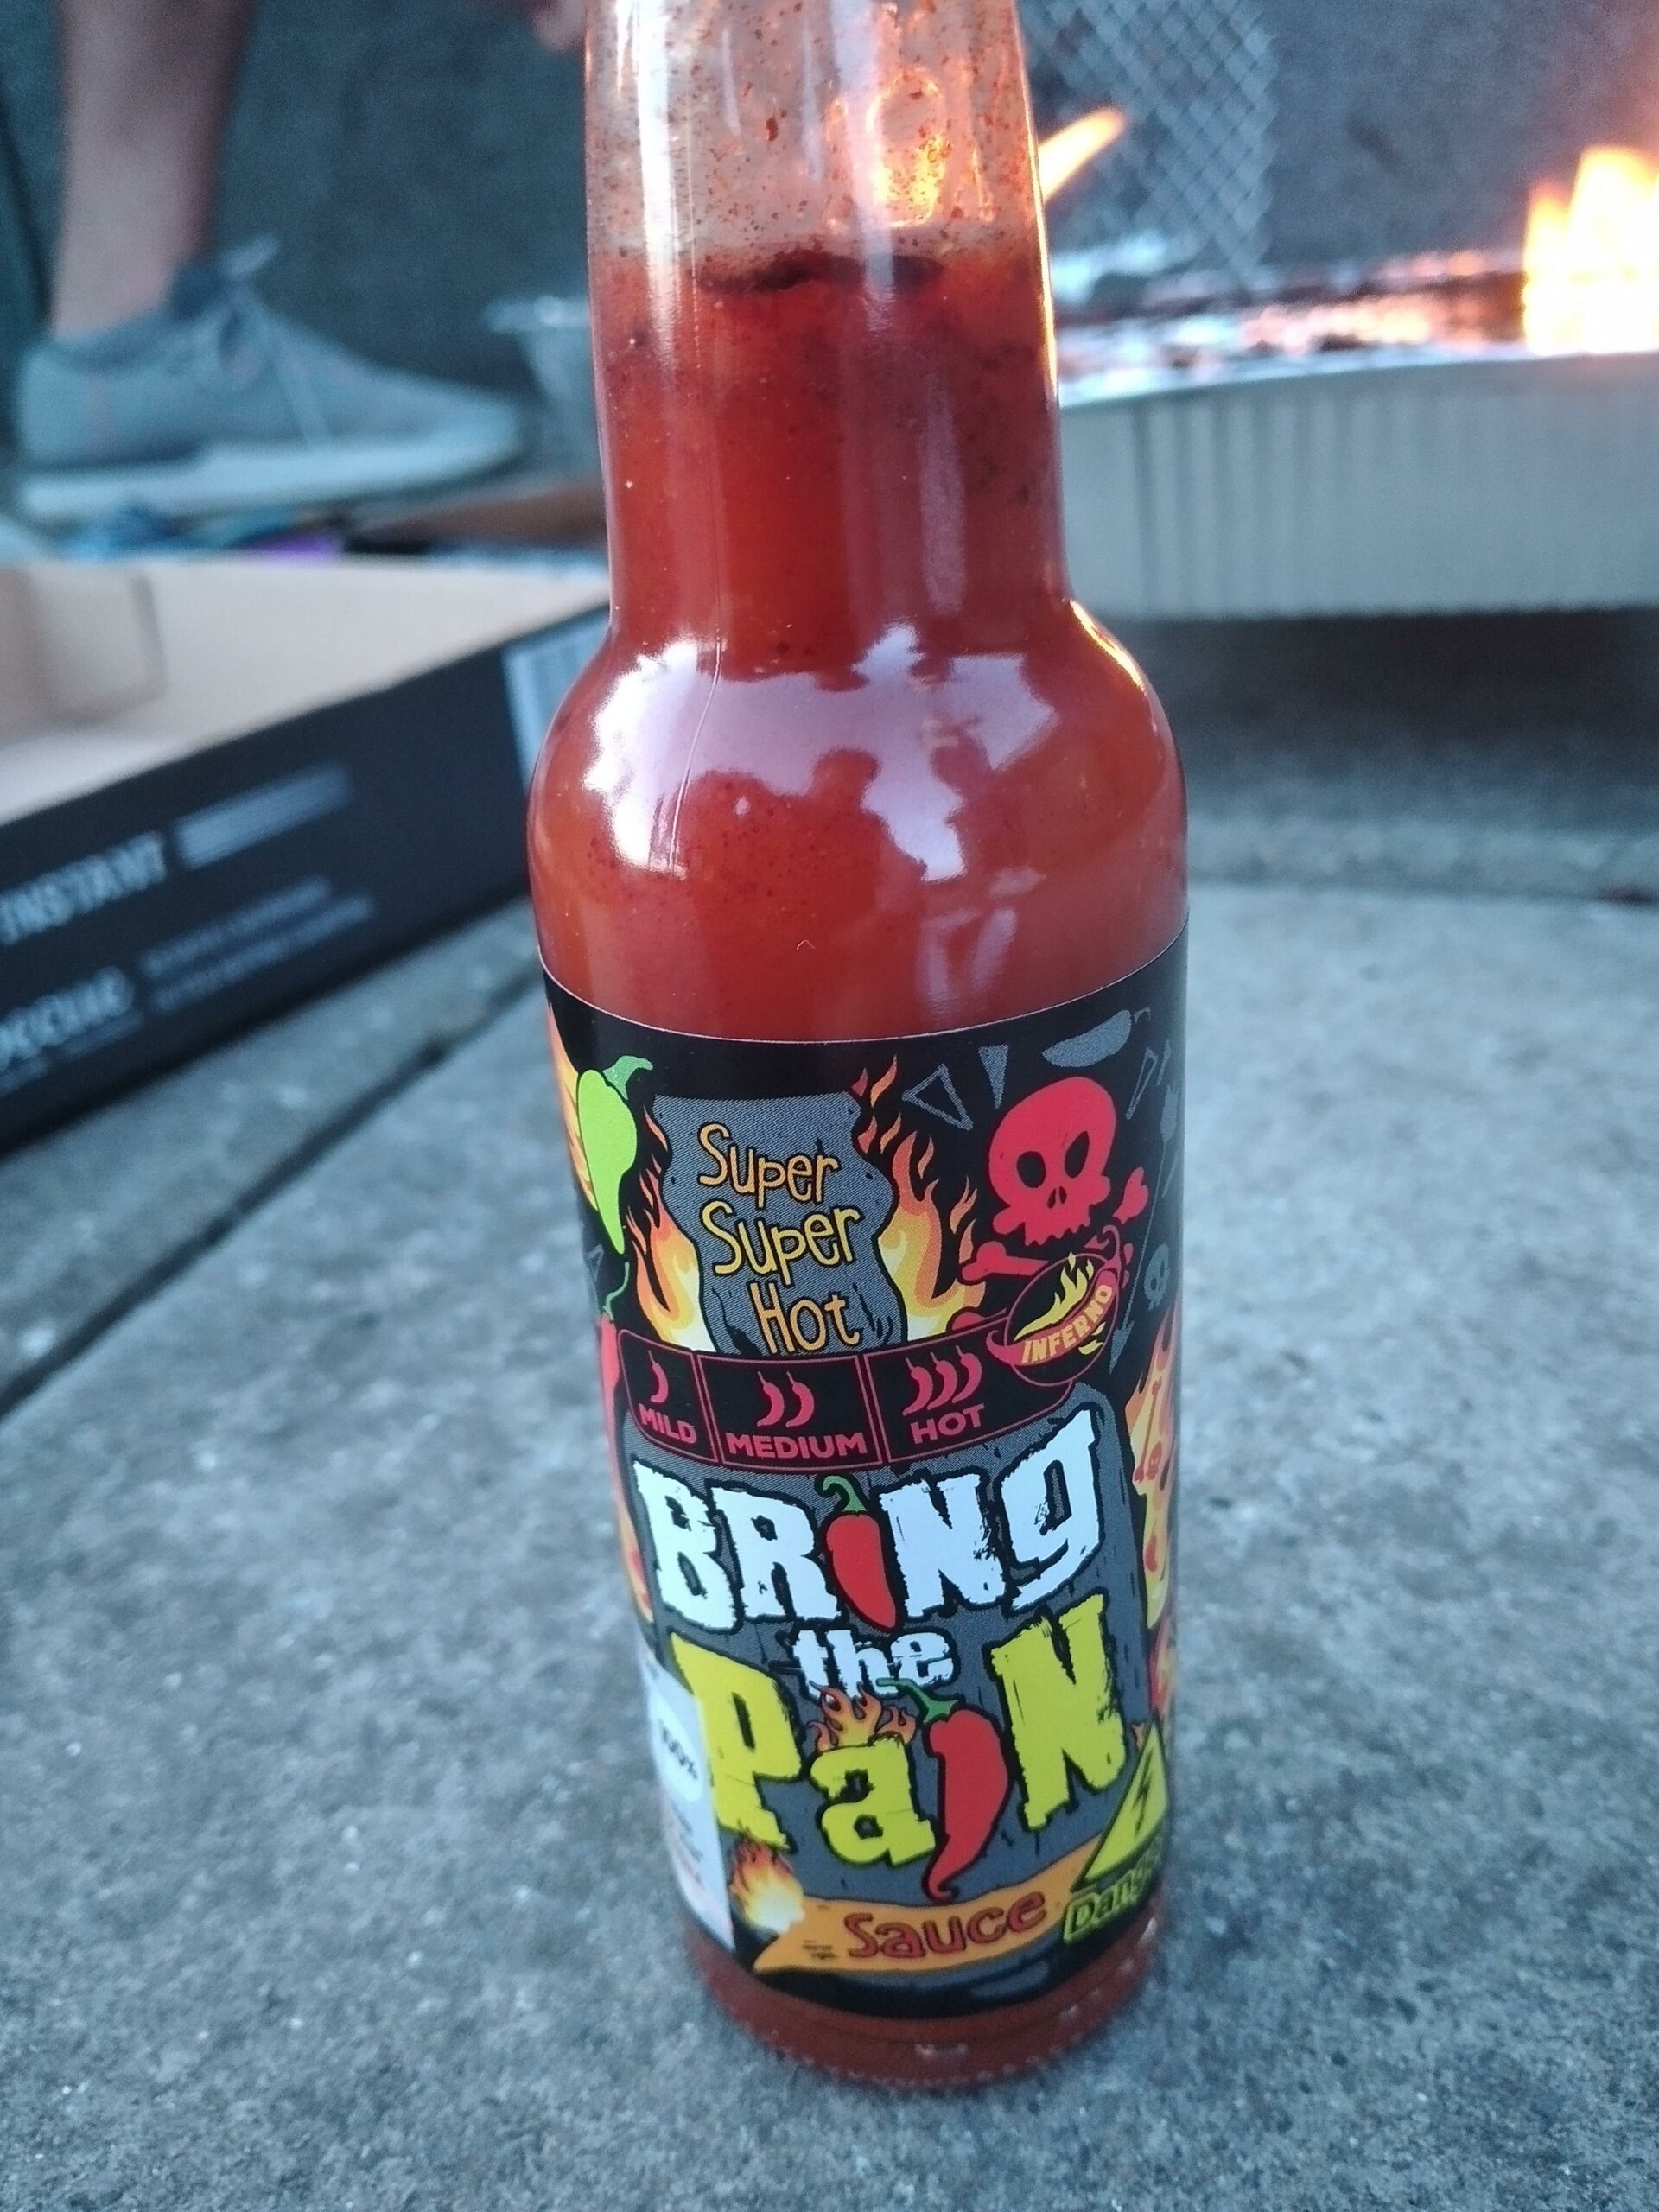 I expected absolutely nothing from this Lidl hot sauce but it has an ...